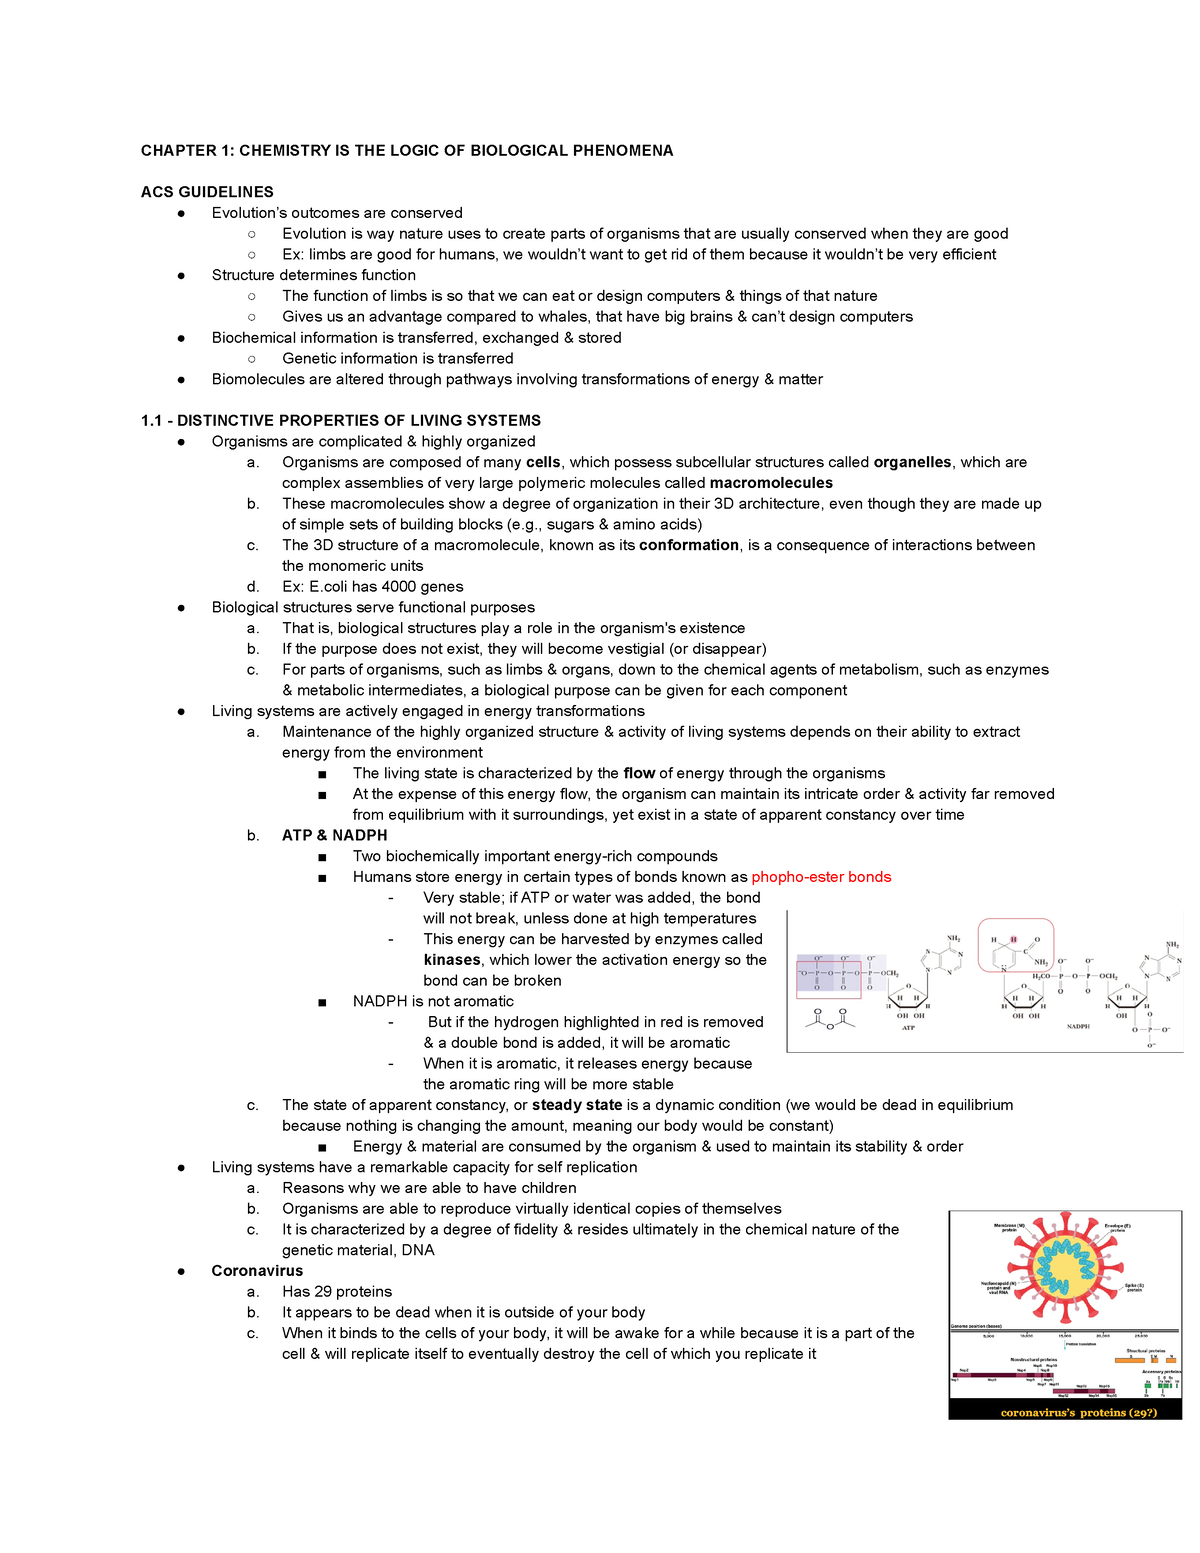 BCH 3033 Chp 1 Notes - CHAPTER 1: CHEMISTRY IS THE LOGIC OF BIOLOGICAL ...